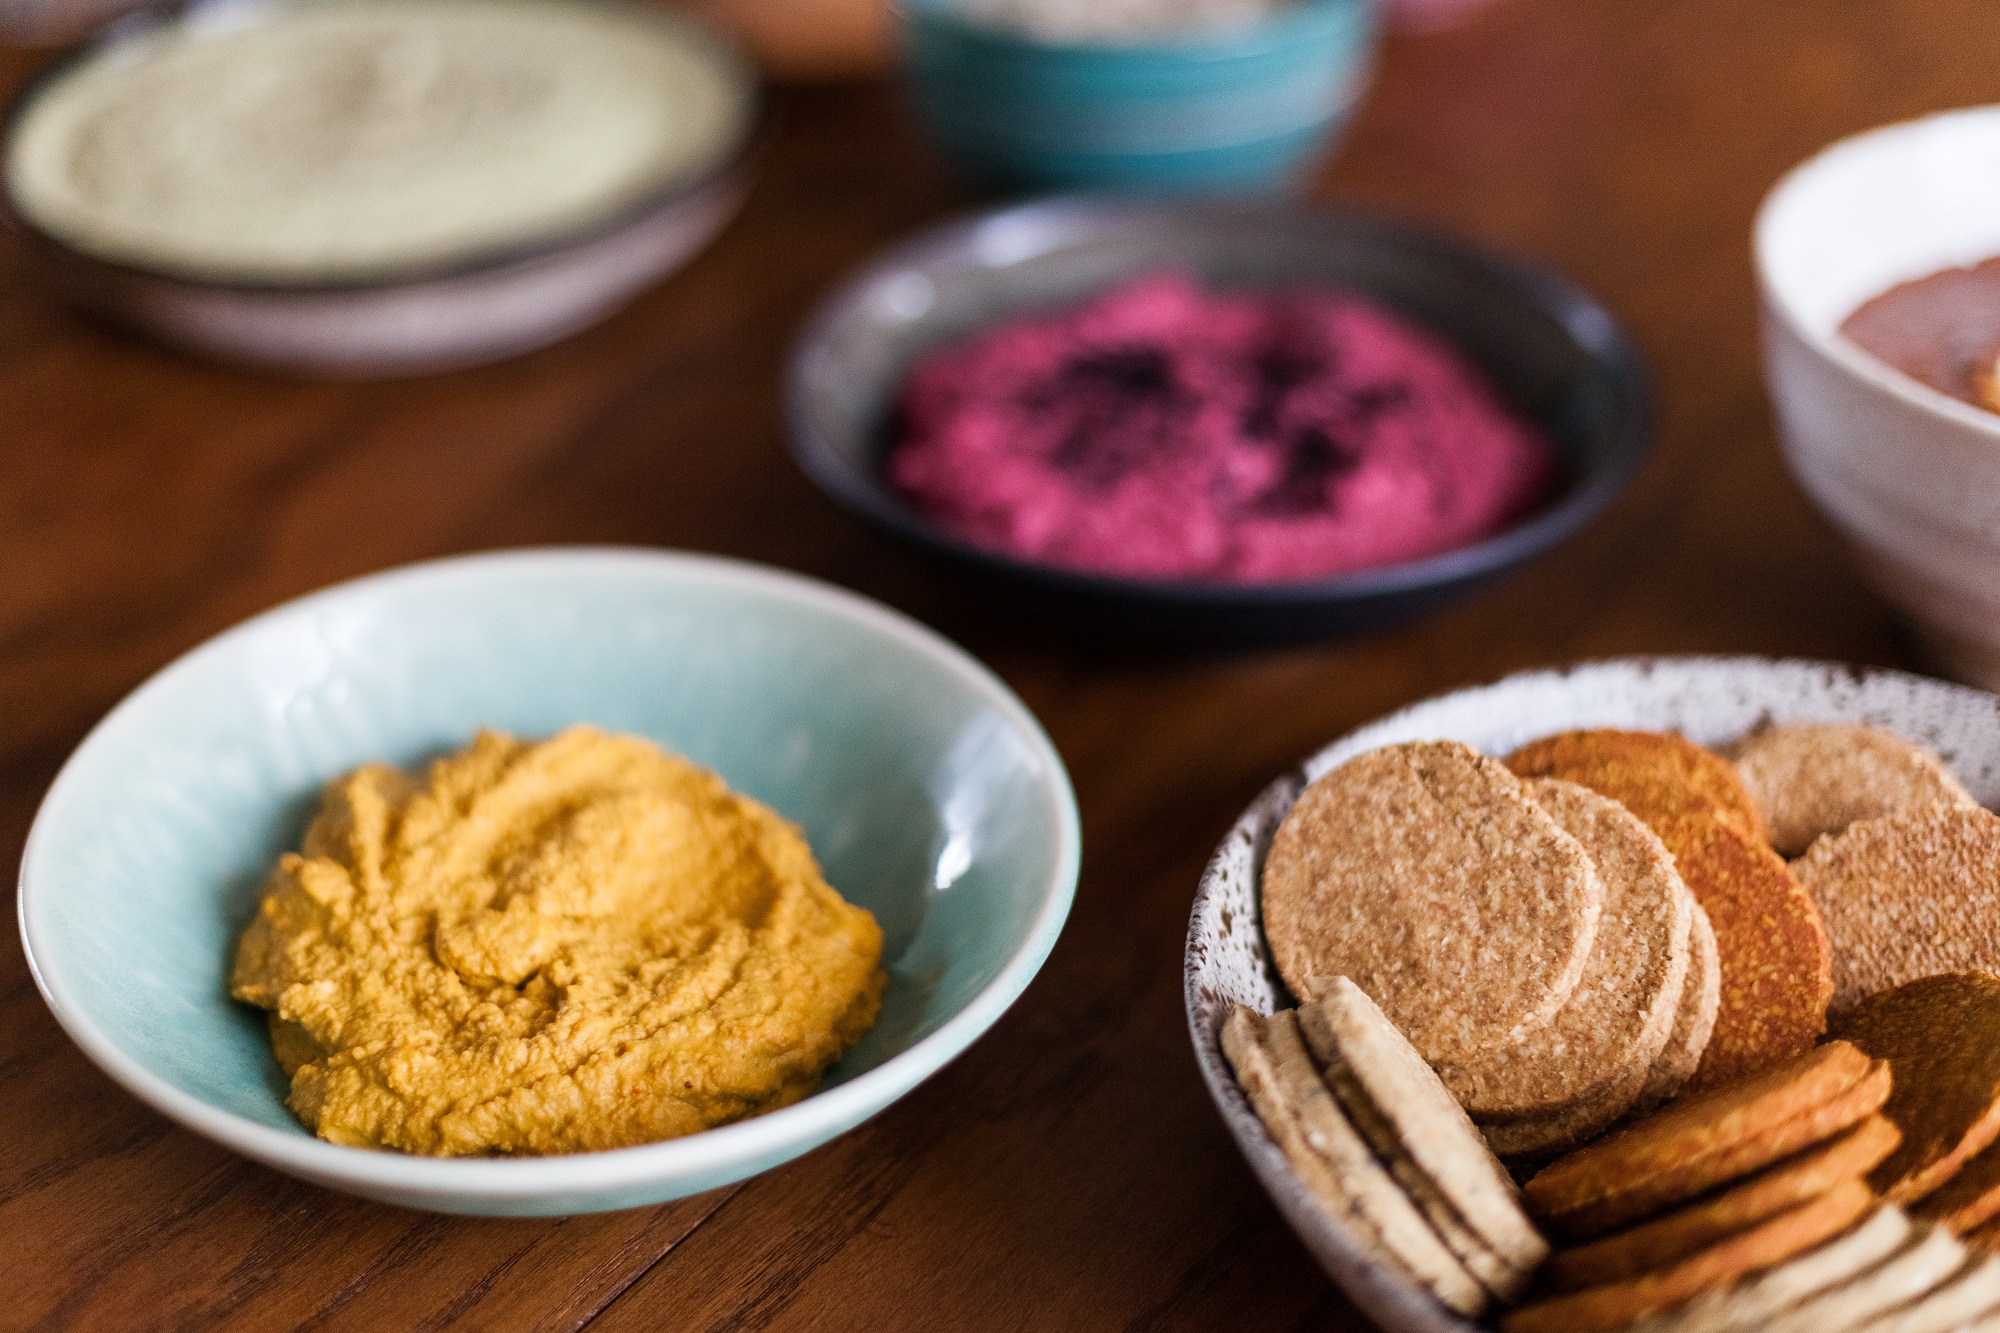 Waste not, want not: UK start-up turns leftover food into hummus